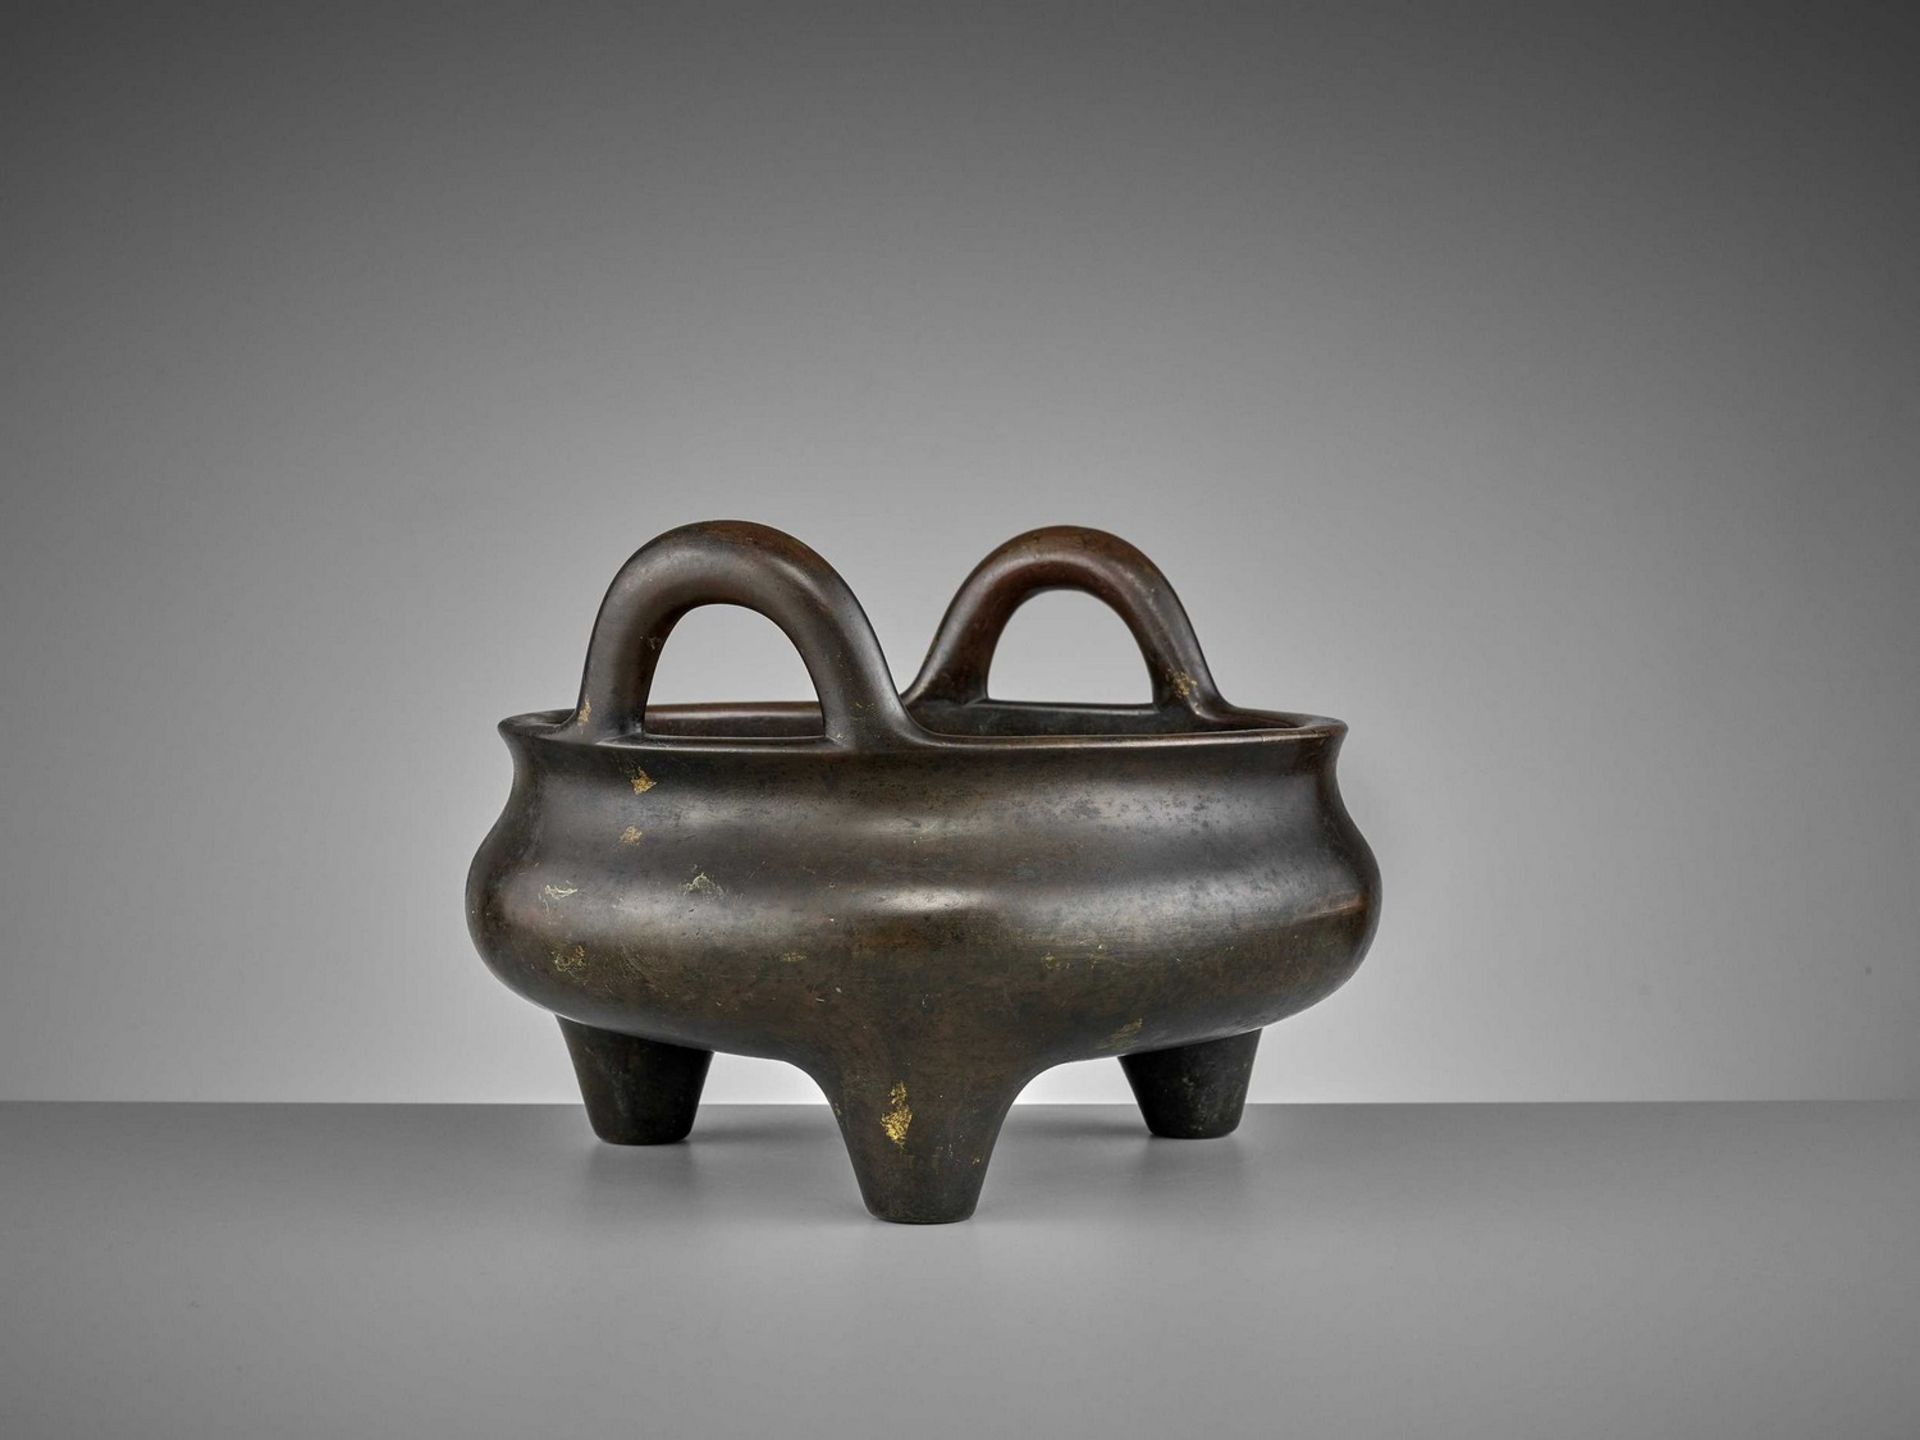 A LARGE AND HEAVILY CAST BRONZE TRIPOD CENSER, 17TH CENTURY